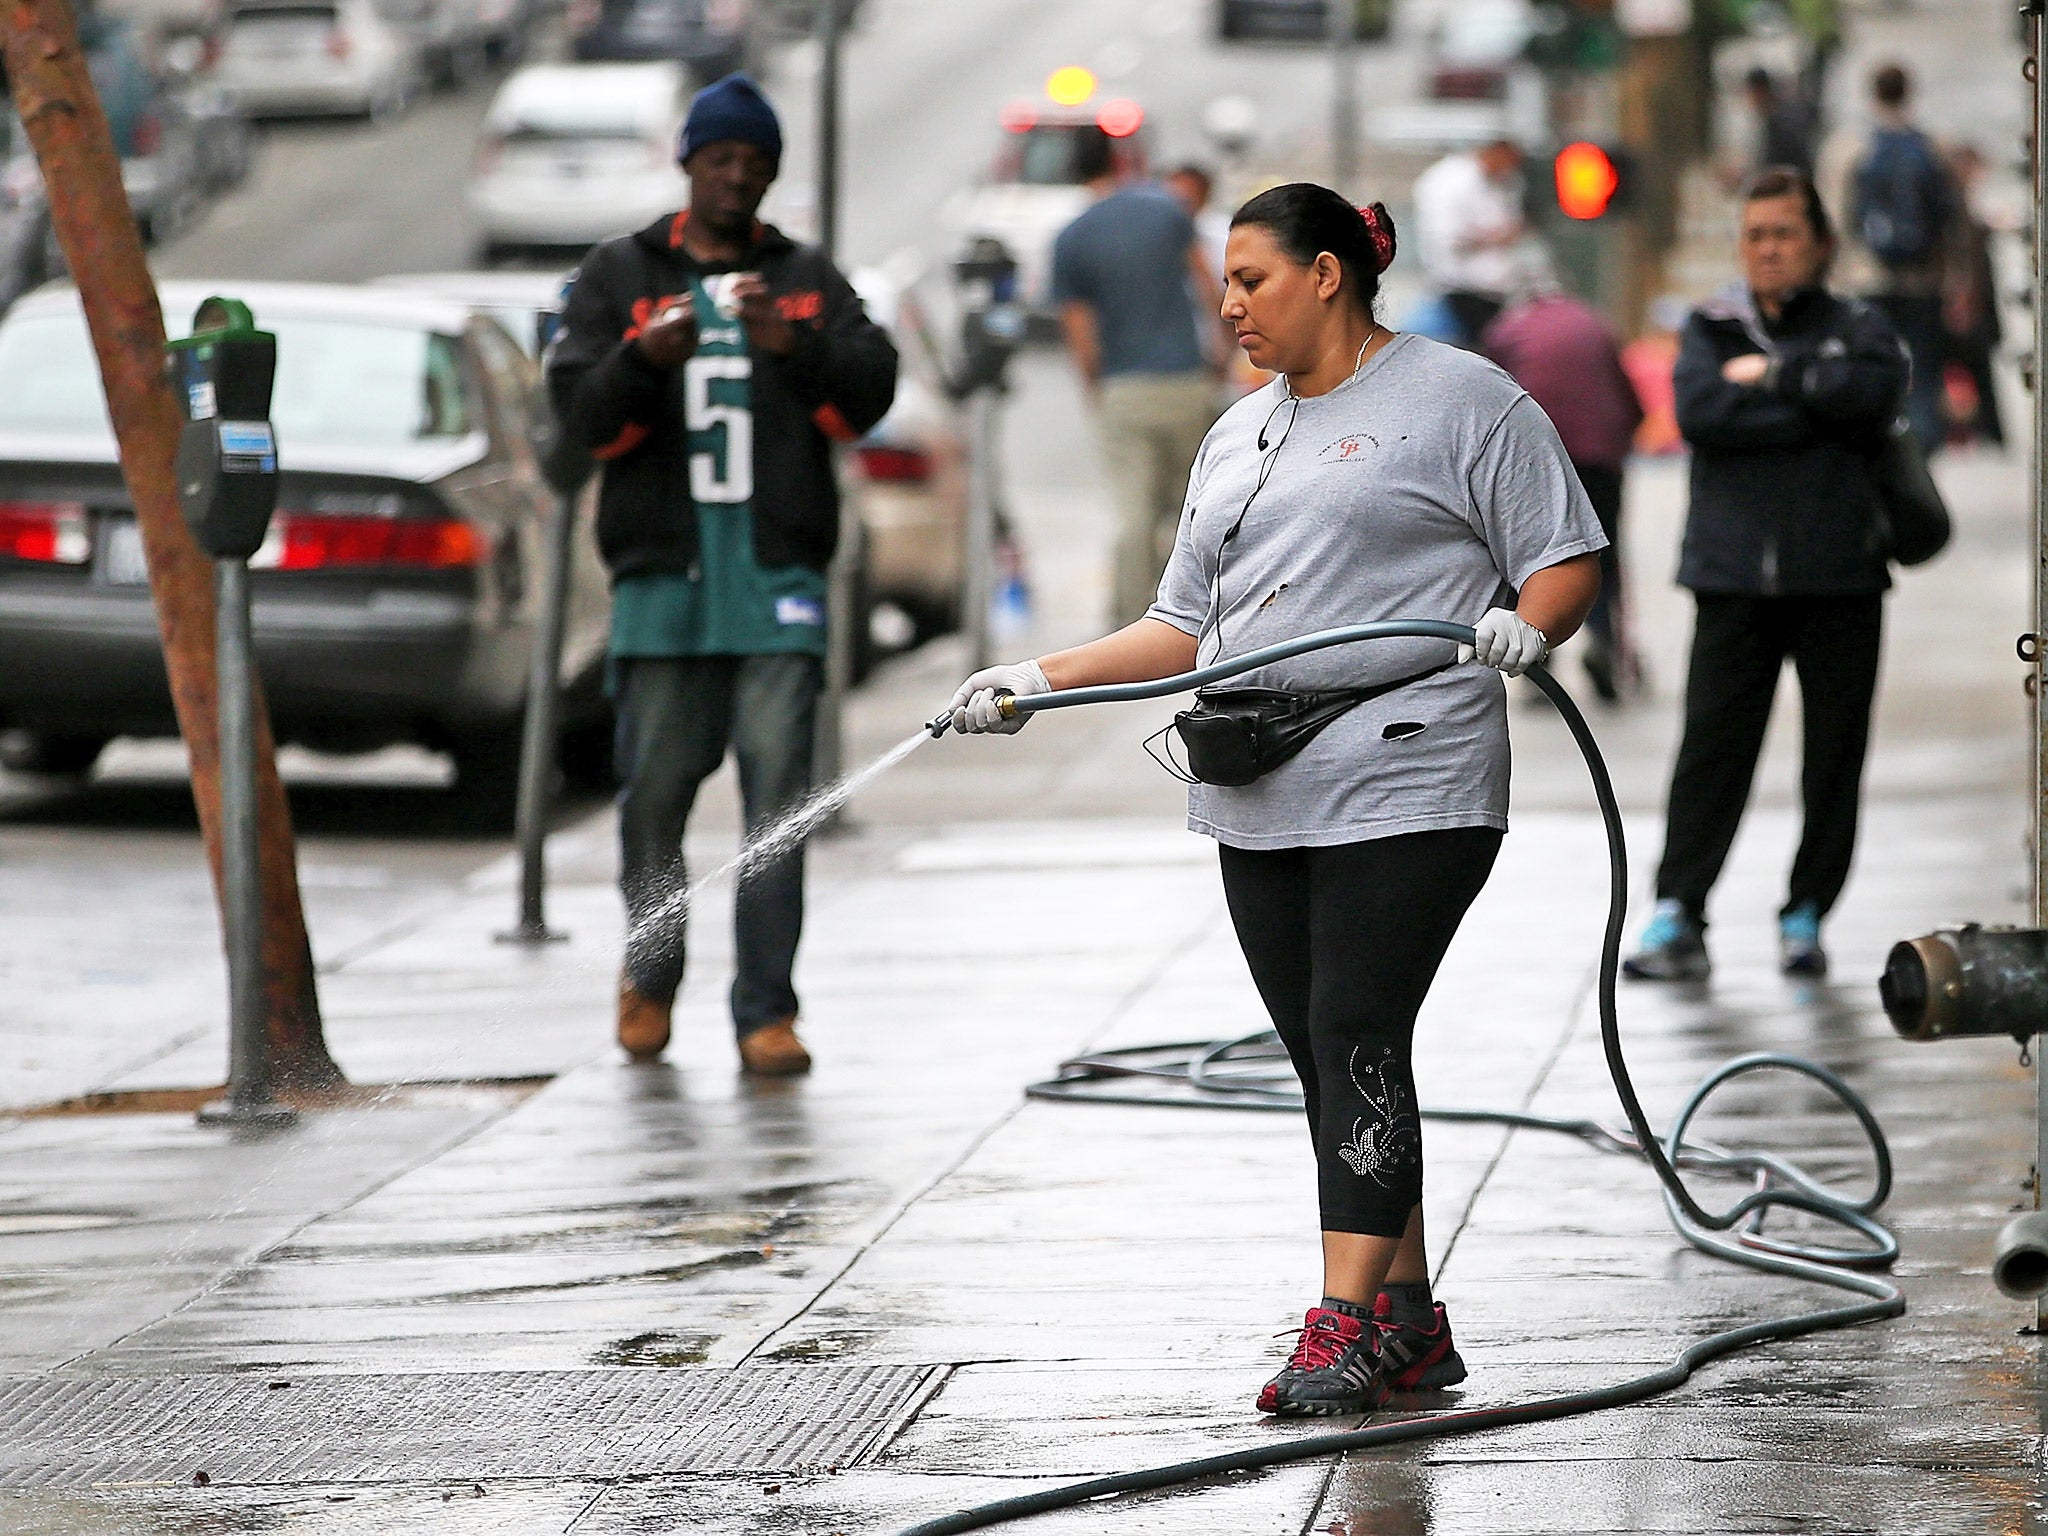 A woman uses a hose to wash the sidewalk in front of an apartment building in San Francisco, California